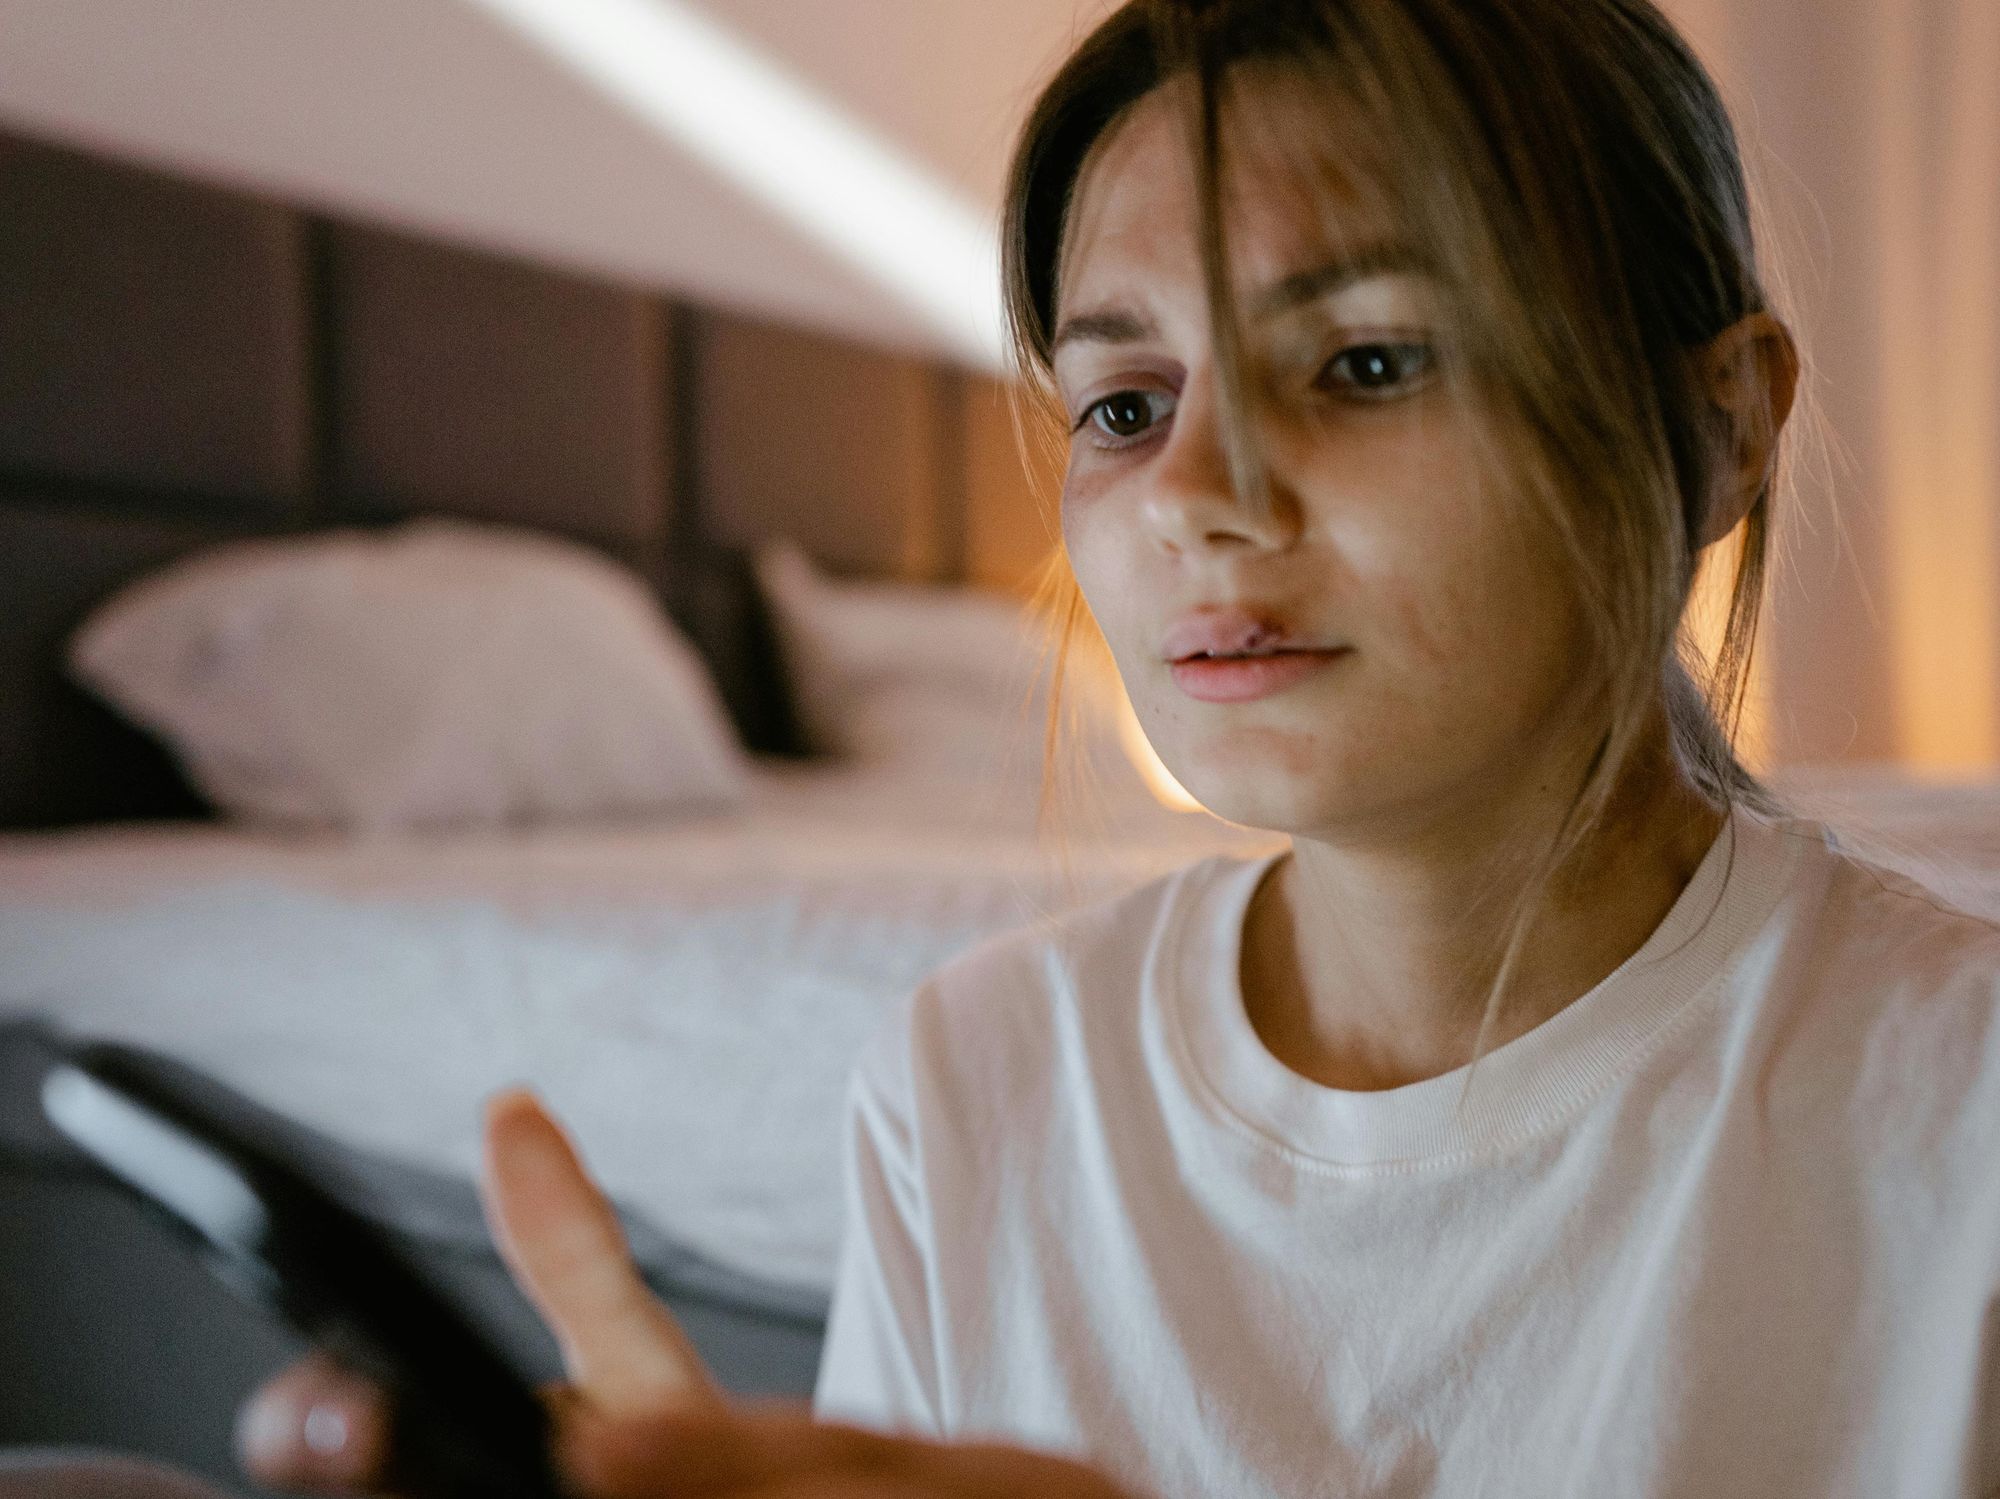 young woman looking at her phone screen with sad expression